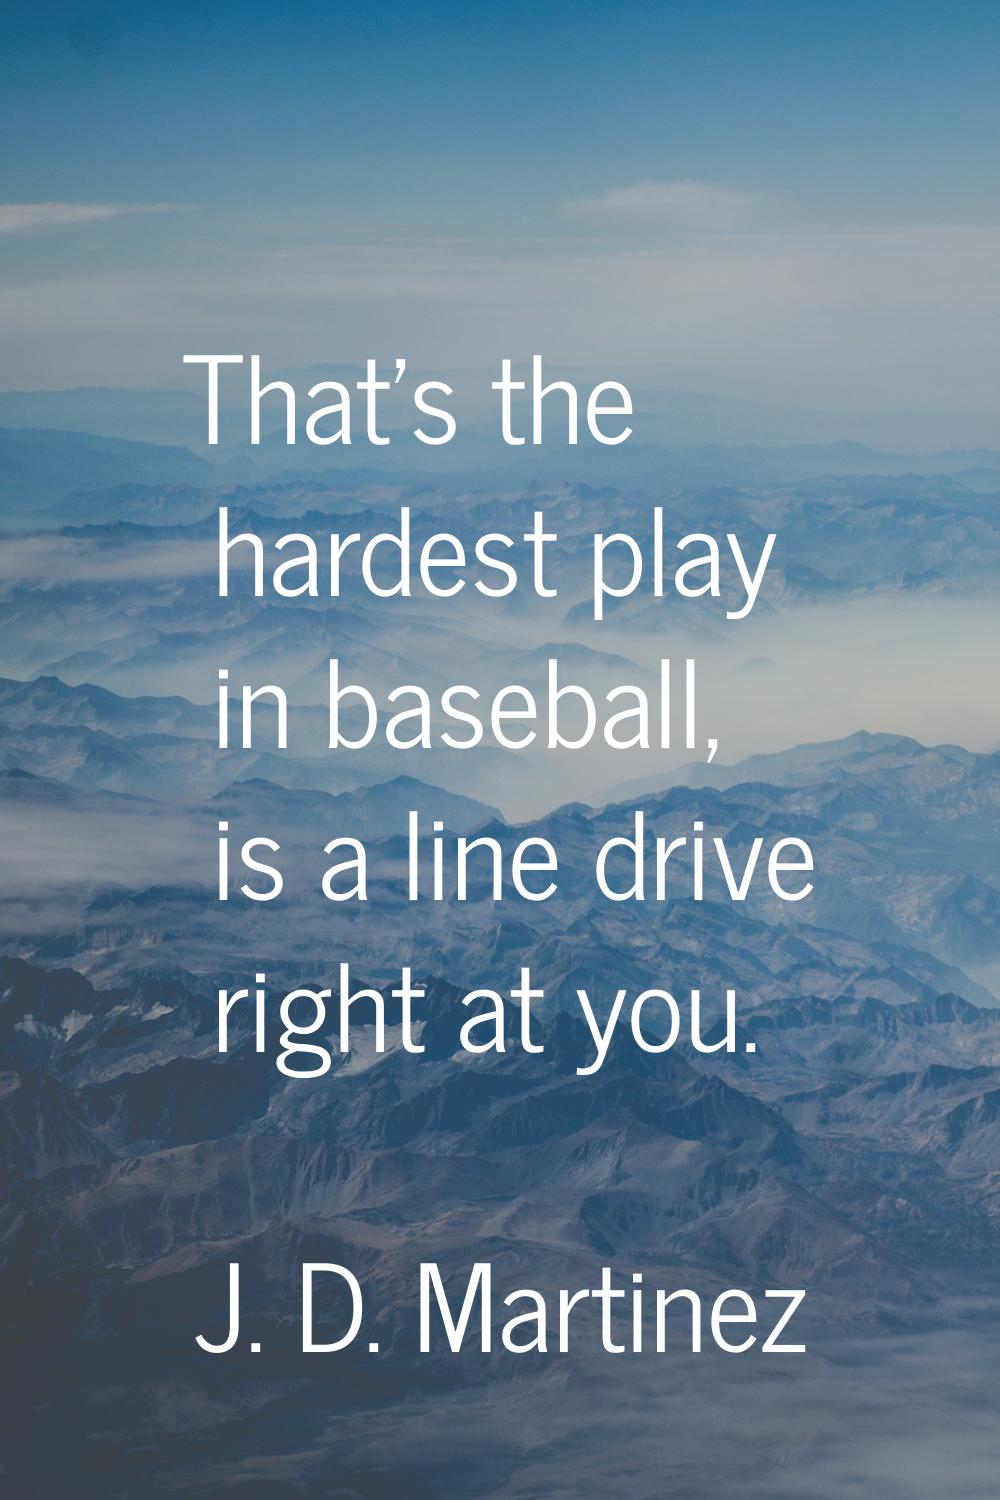 That's the hardest play in baseball, is a line drive right at you.